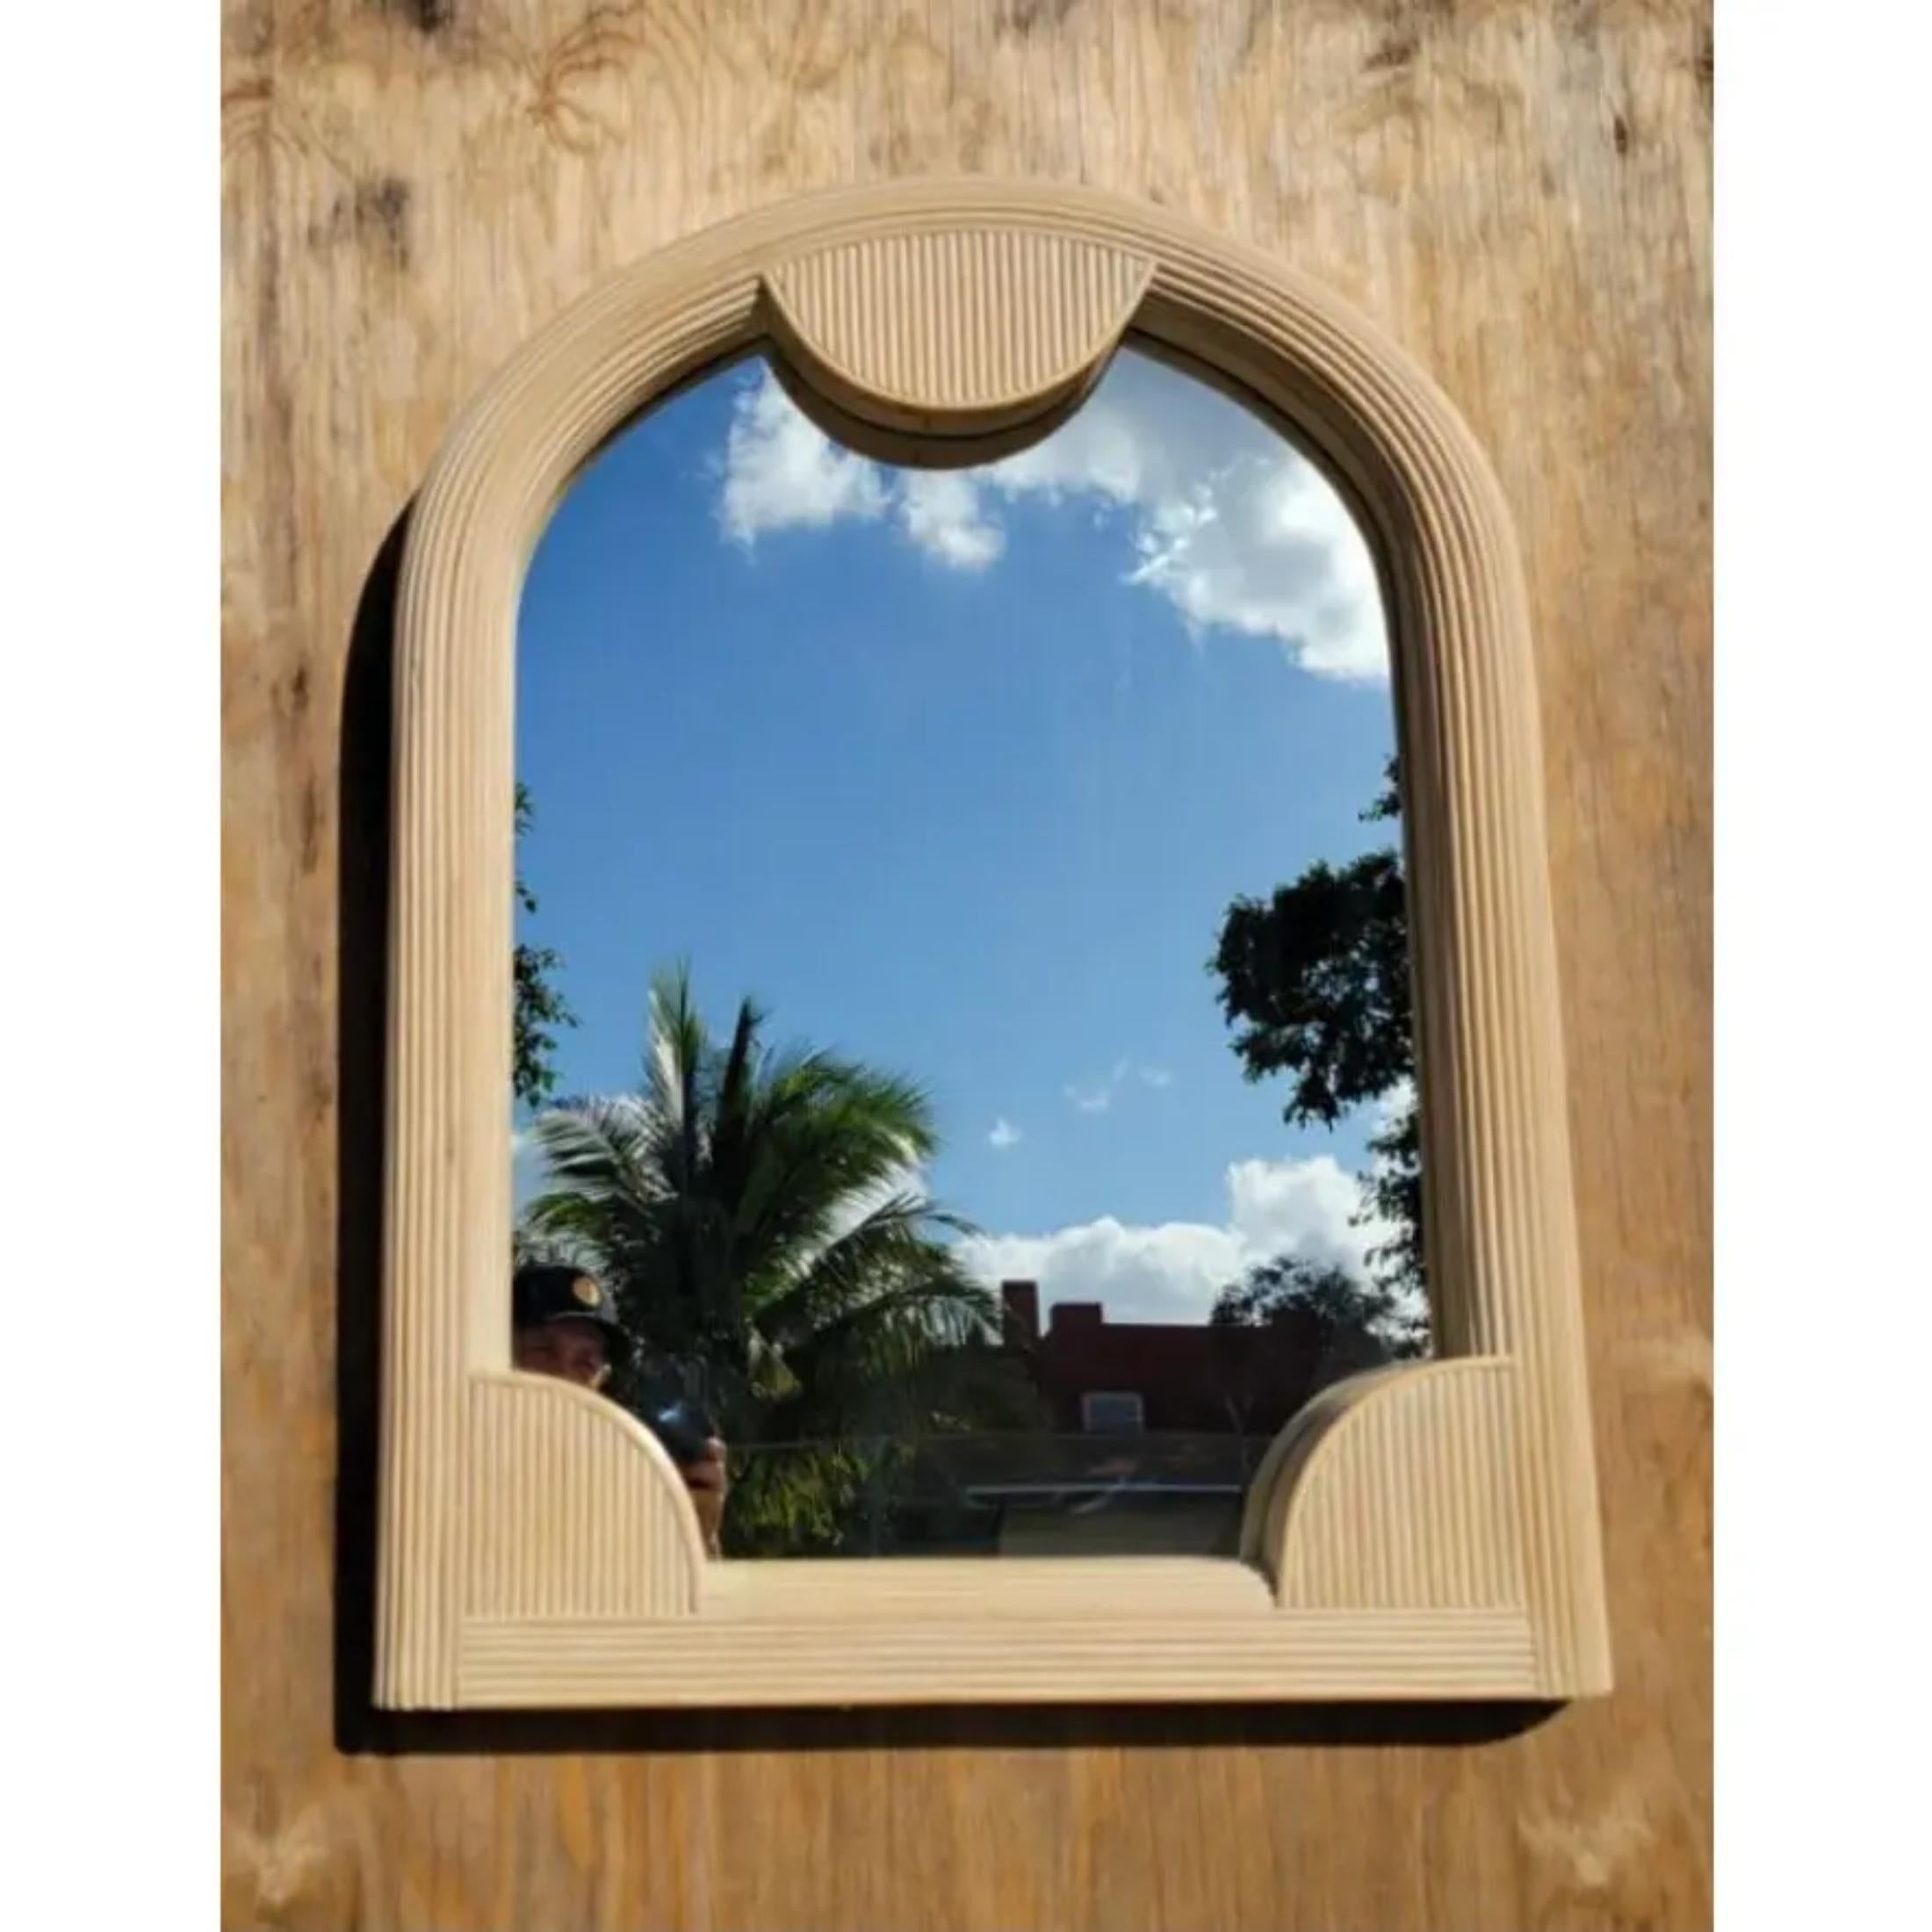 Fantastic vintage cerused pencil reed mirror. Chic arched shape with Postmodern elements. A great spa edition to any decor. Acquired from a Palm Beach estate.